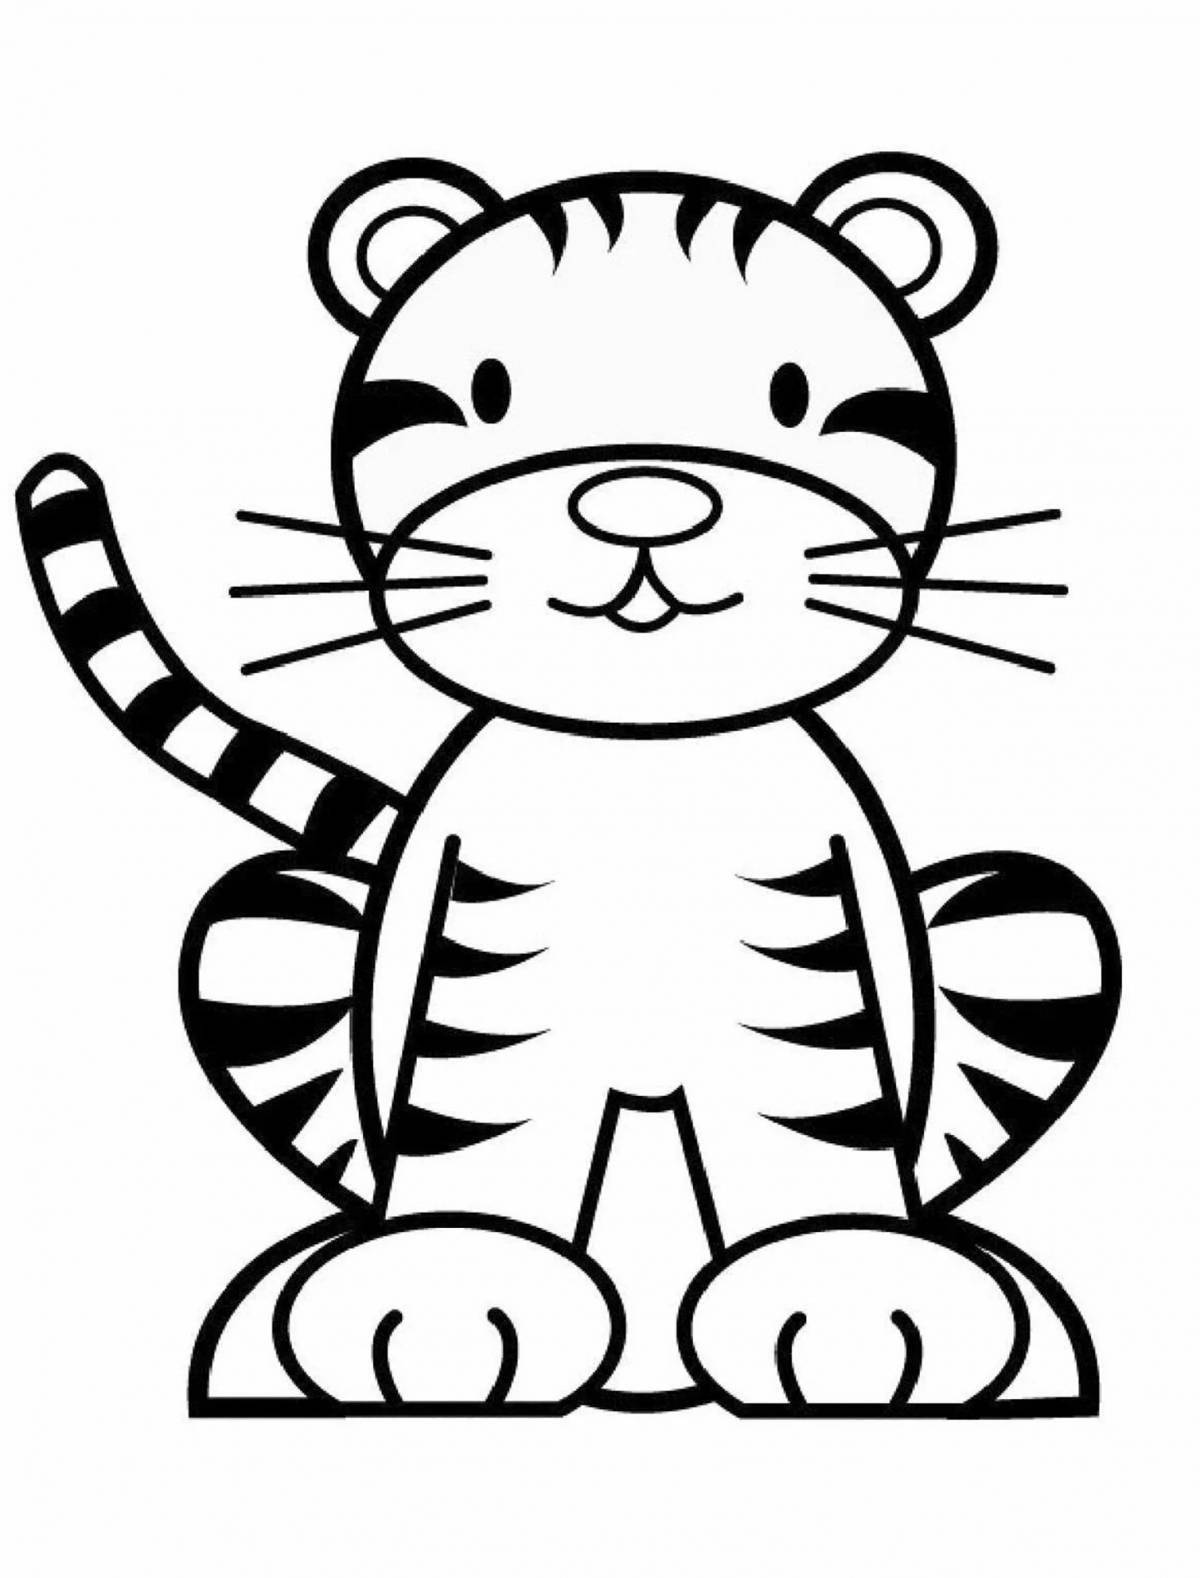 Outstanding tiger coloring page for kids